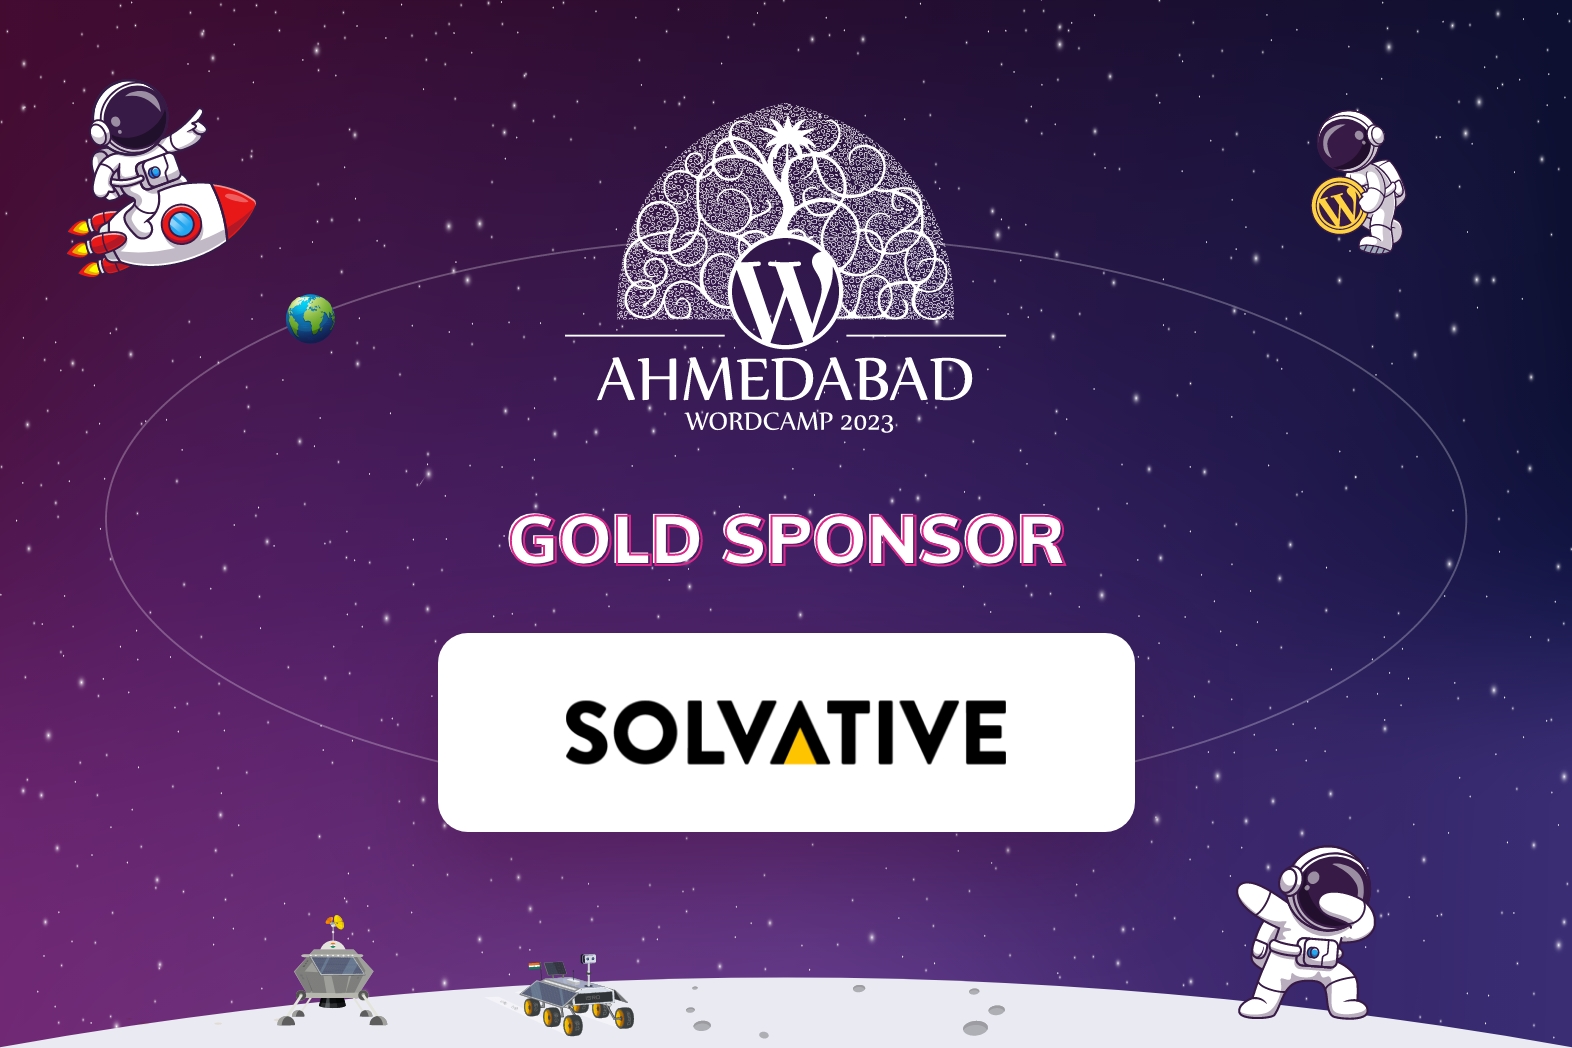 Thank You Solvative, for being our Gold Sponsor 